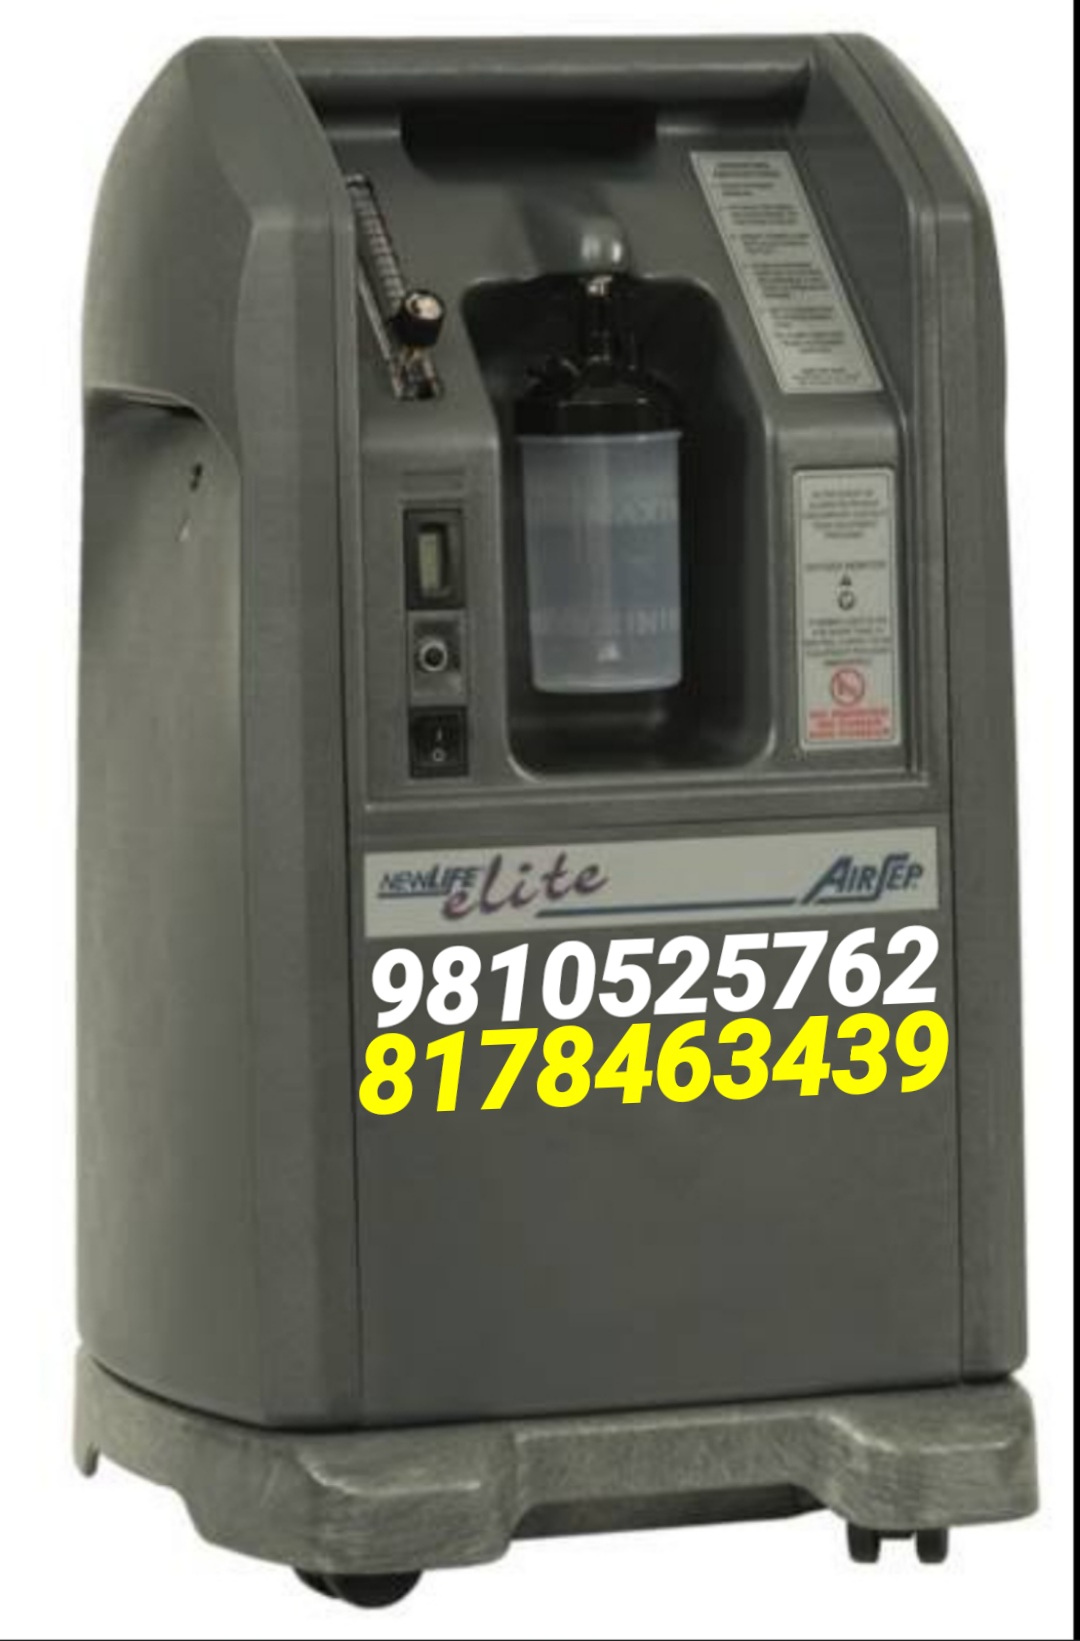 OXYGEN CONCENTRATOR SERVICE 9810525762,8178463439